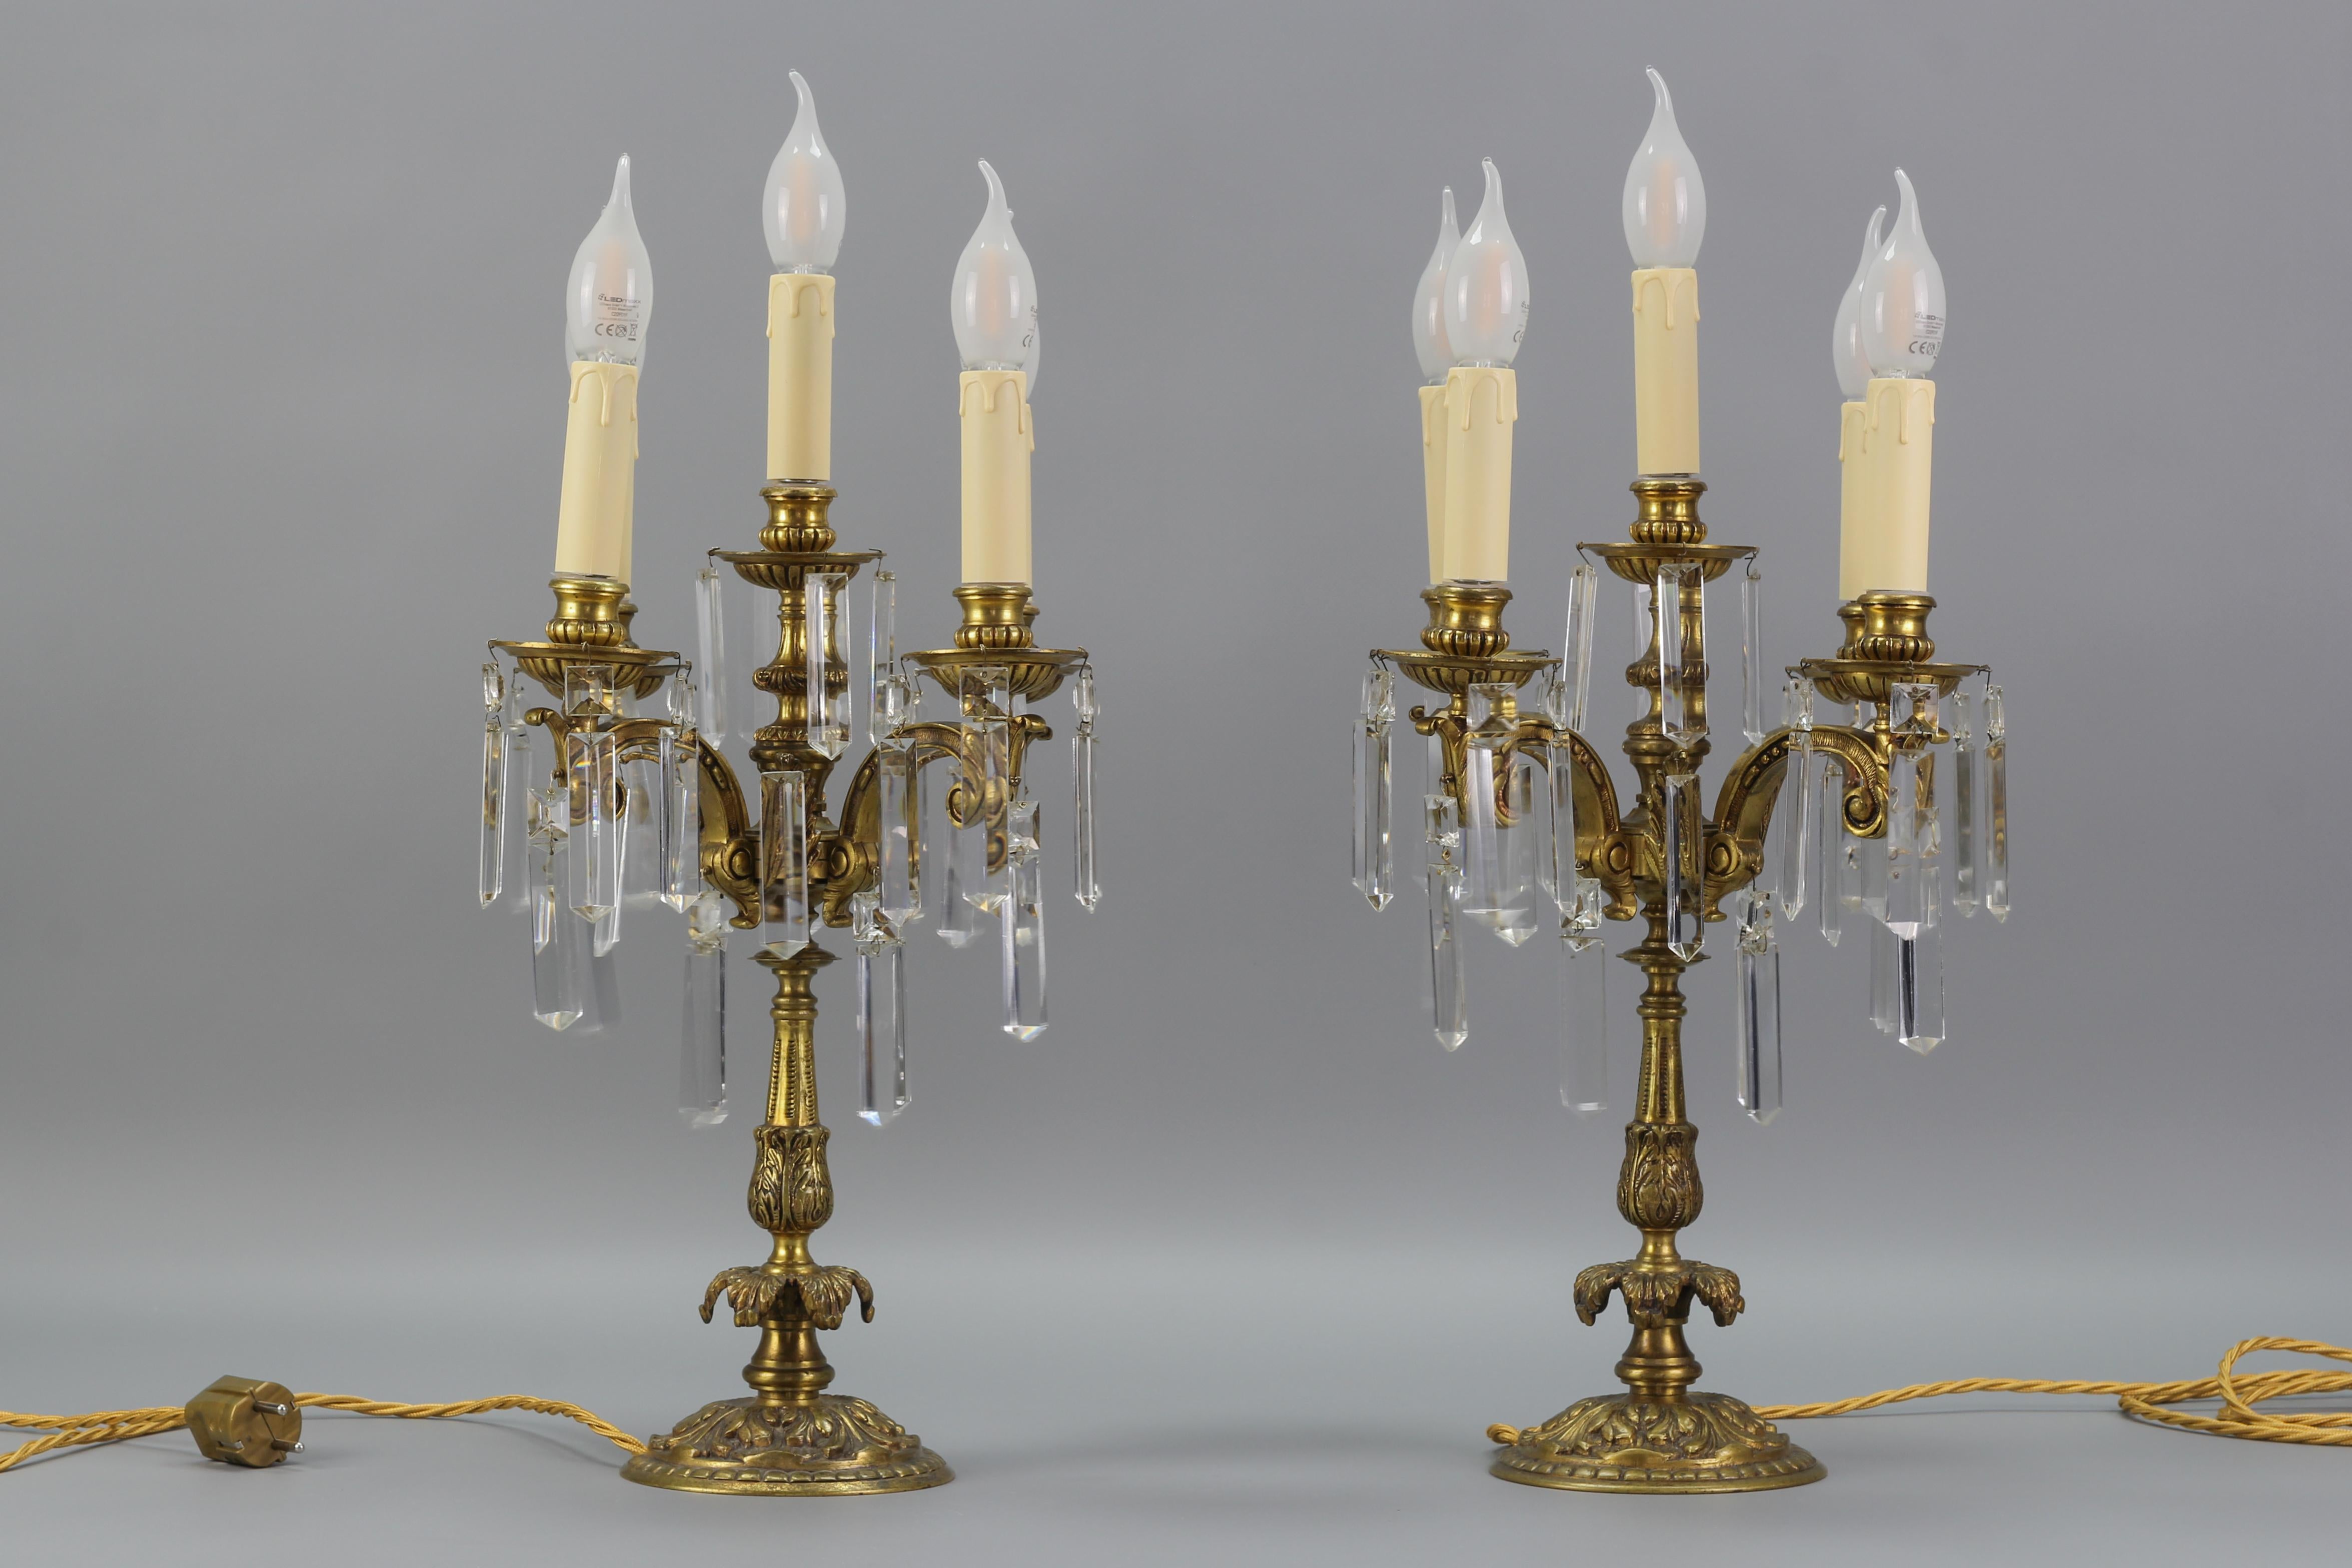 French Louis XVI Style Bronze and Crystal Candelabra Table Lamps, Set of 2 For Sale 2